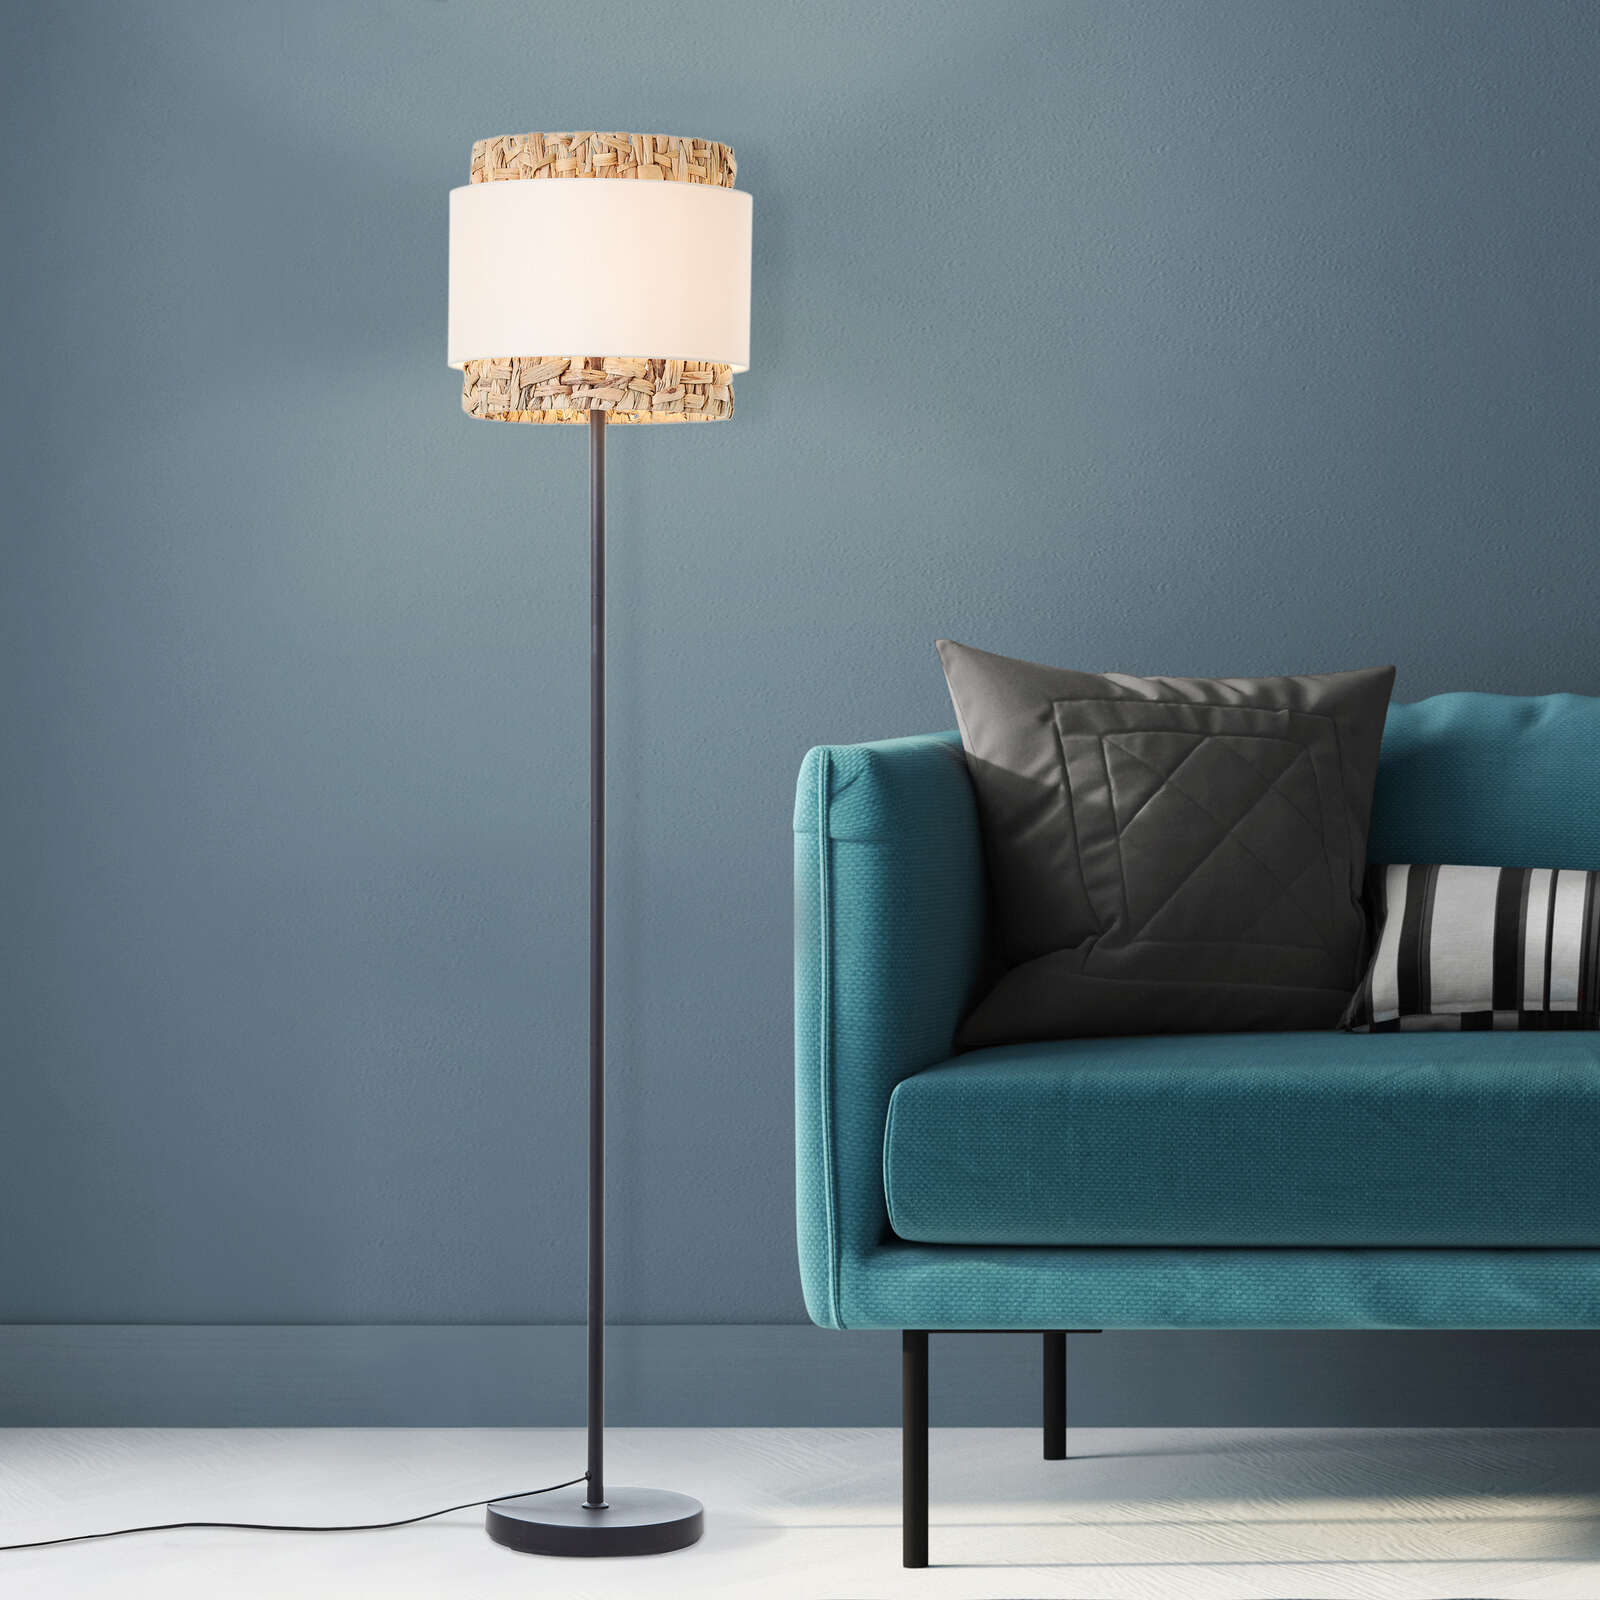             Floor lamp made of textile - Till 7 - Brown
        